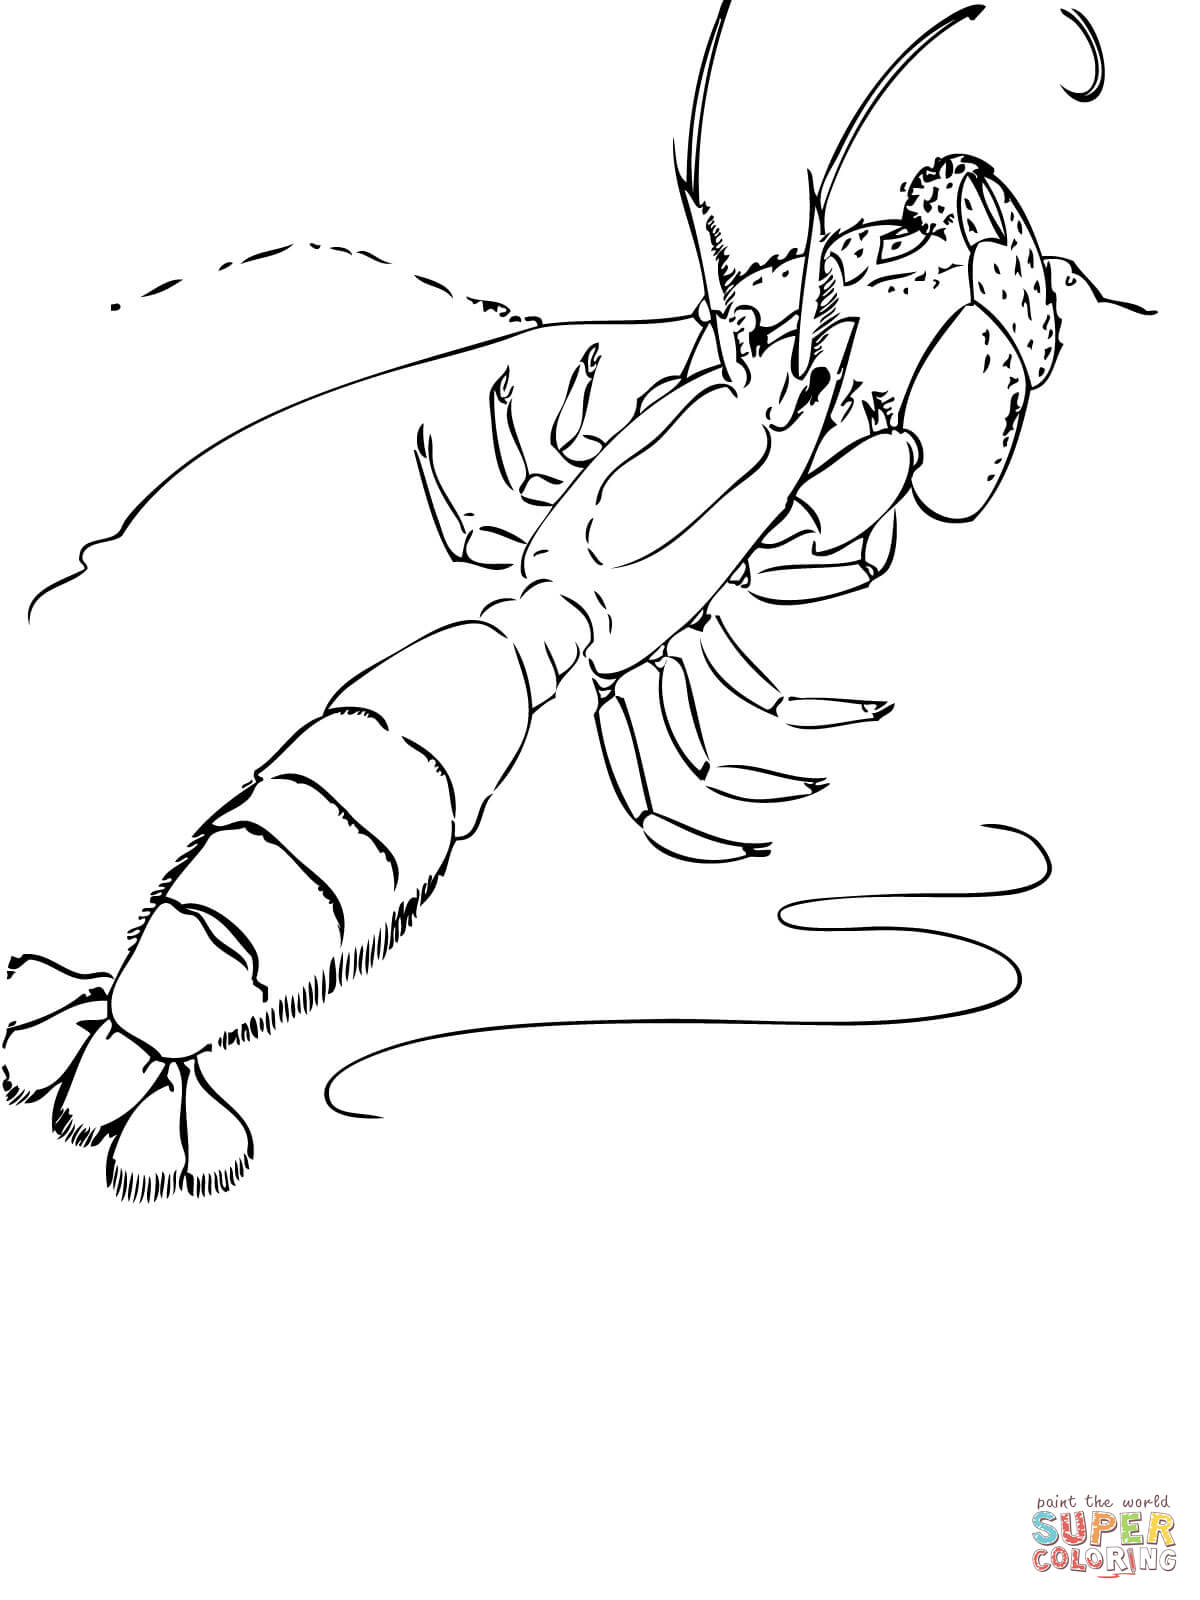 Shrimp coloring pages | Free Coloring Pages